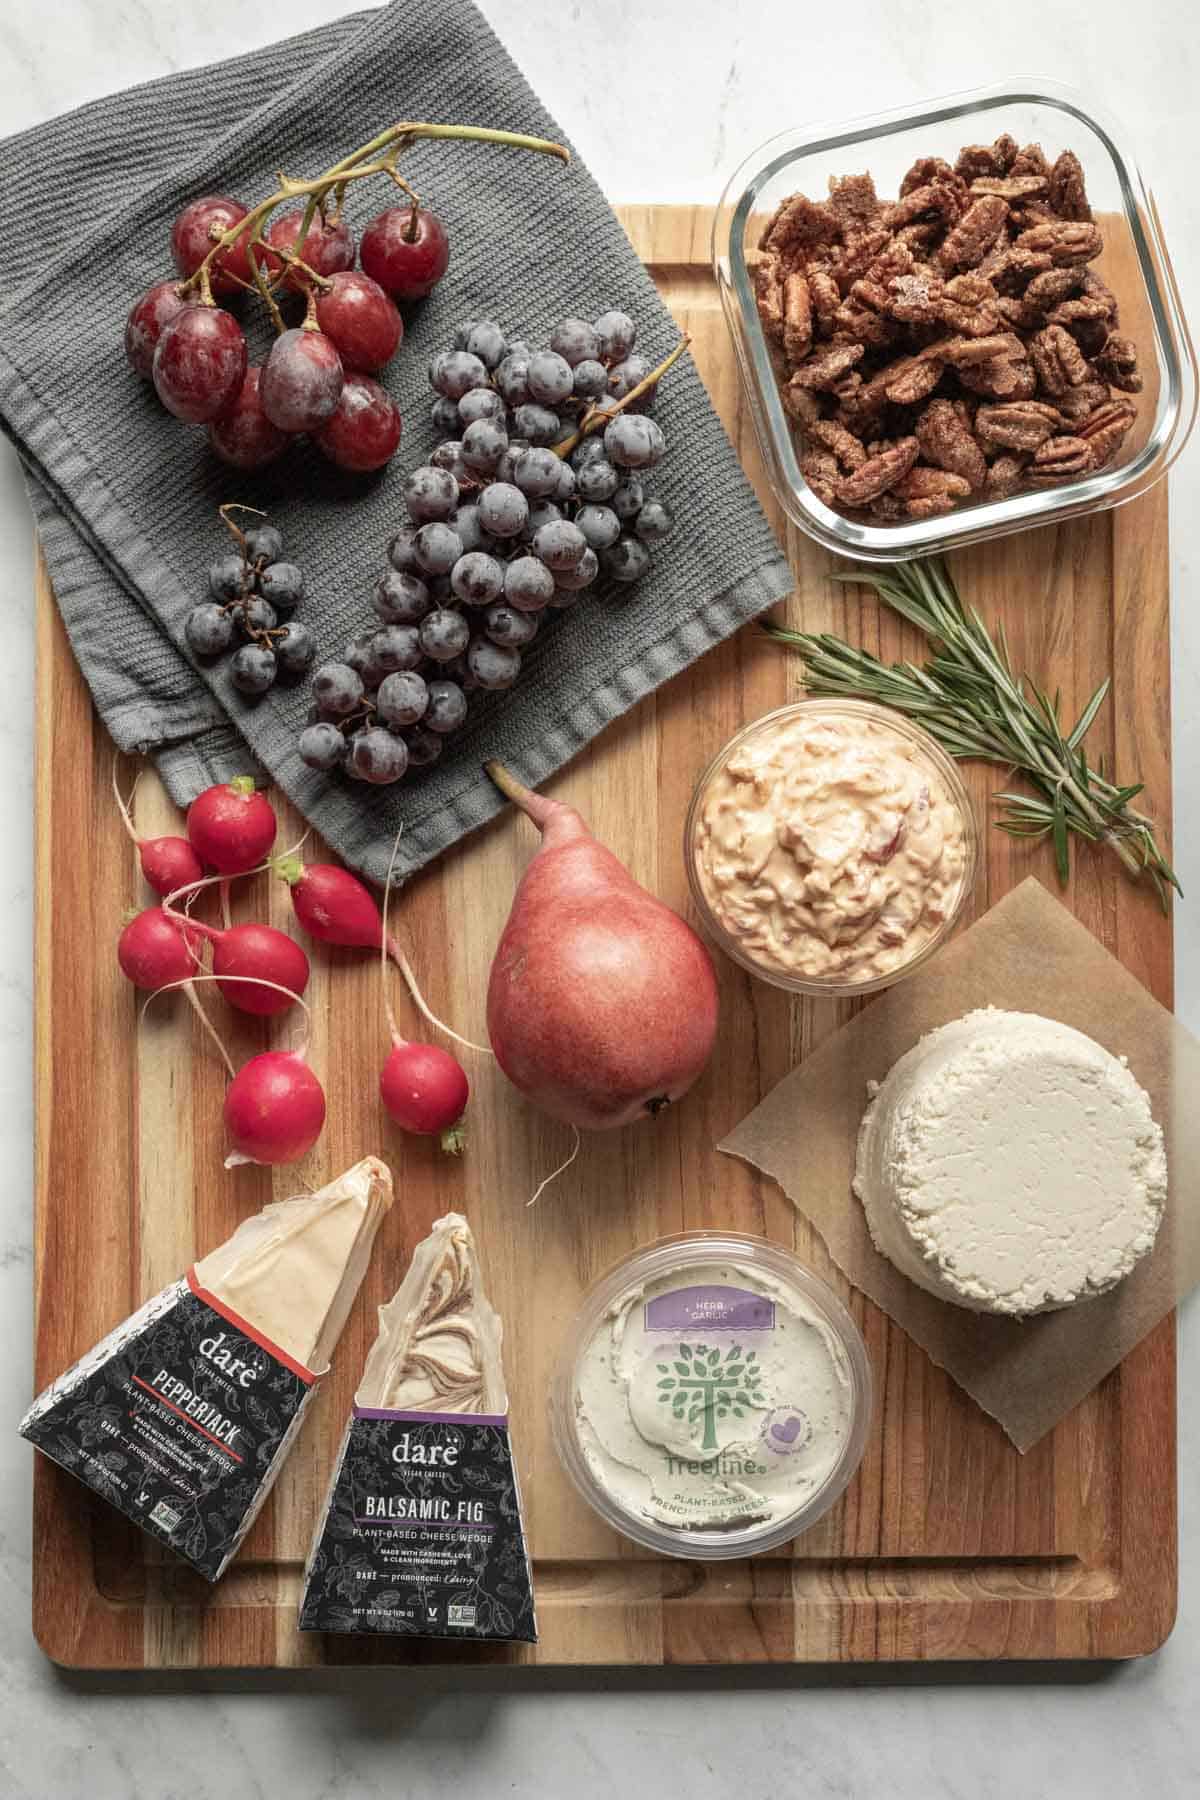 The ingredients used on our vegan cheese board laid out on a large wood cutting board.